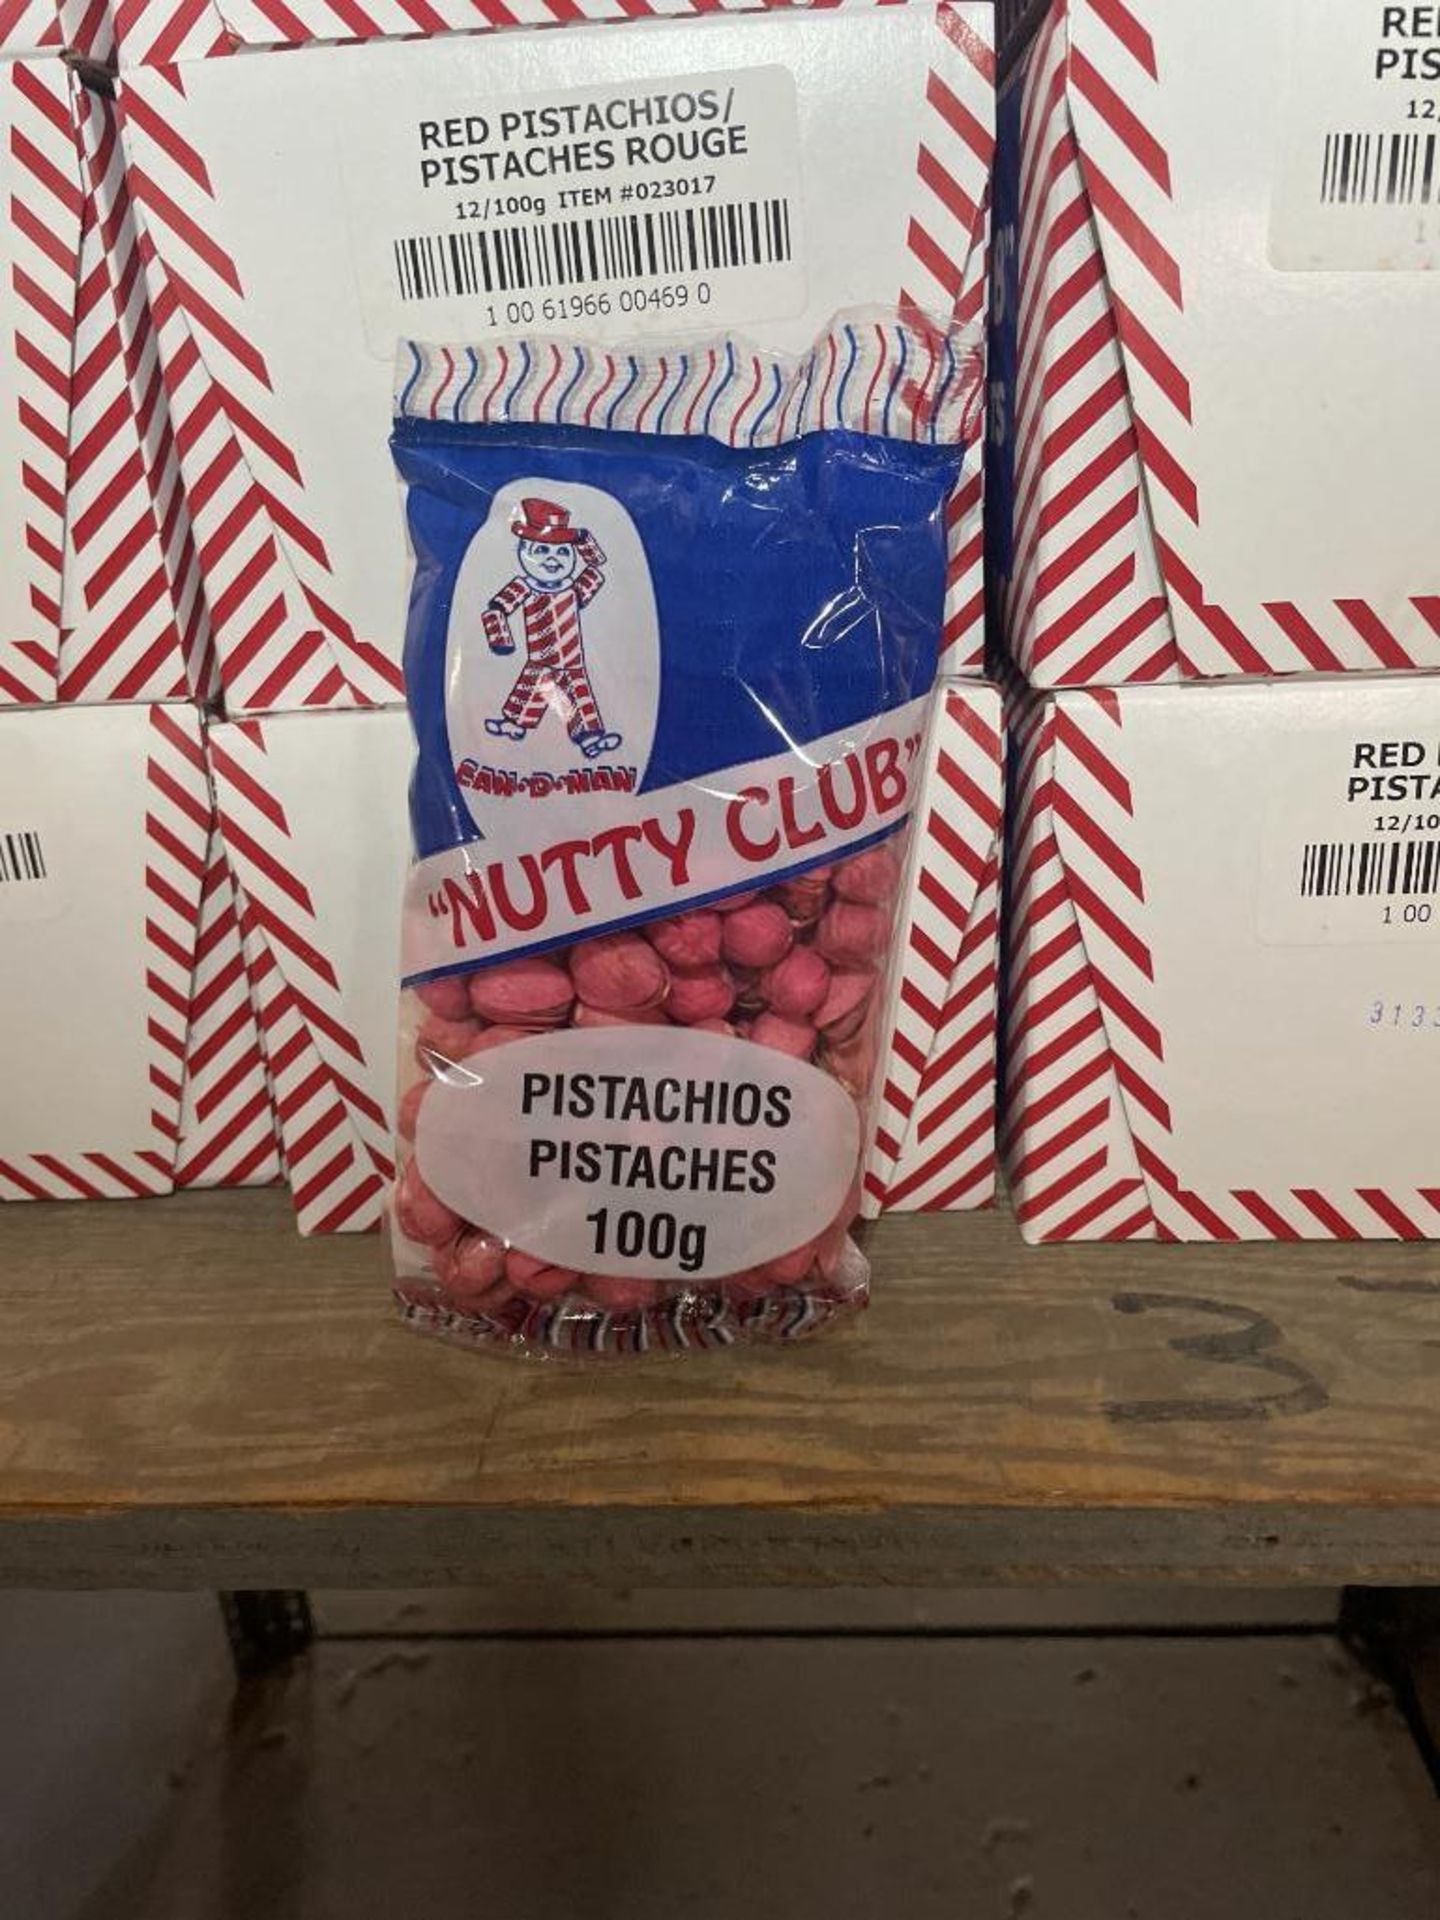 (21) BOXES OF NUTTY CLUB RED PISTACHIOS, 12/100G PER BOX - Image 2 of 3